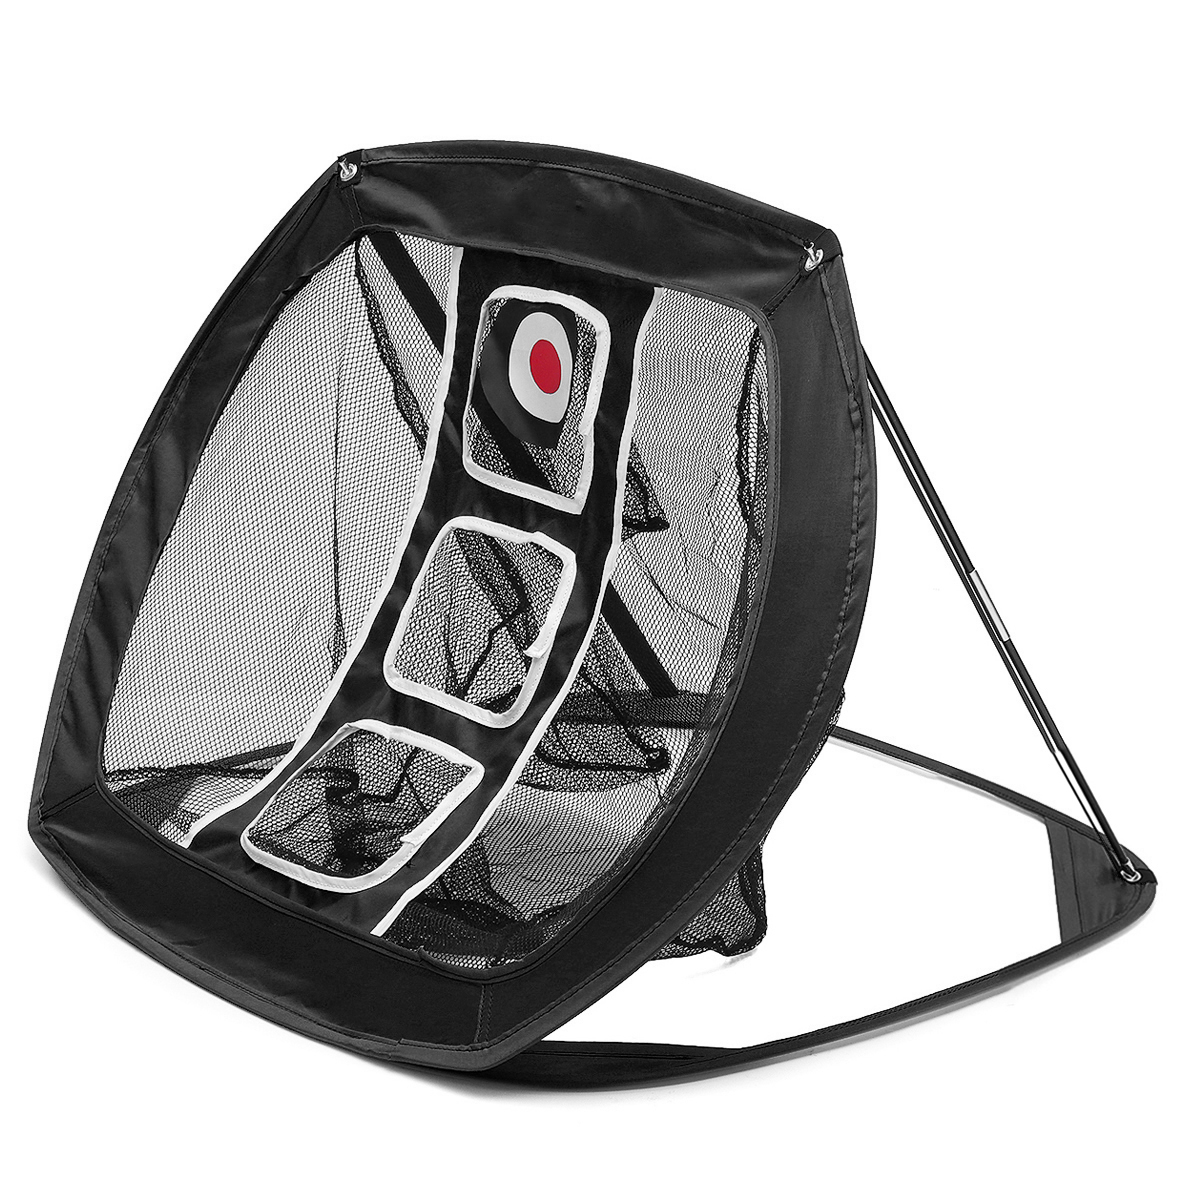 Foldable-Golf-Chipping-Net-Backyard-Driving-Aid-Indoor-Outdoor-Hitting-Practice-Garden-Living-Room-B-1688178-4